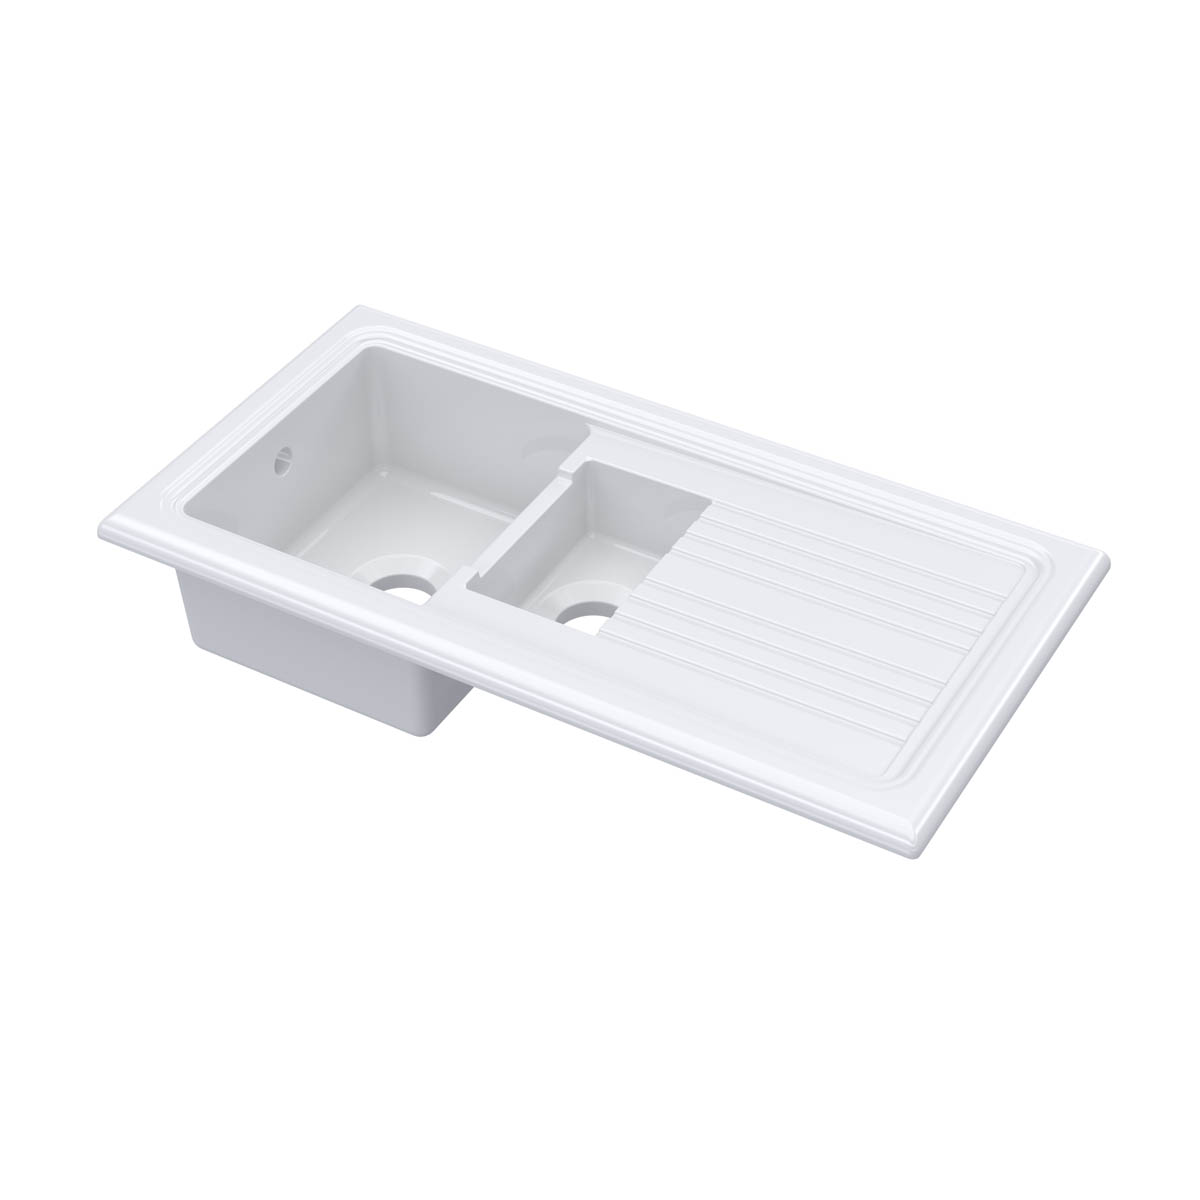 Nuie 1010x525mm 1.5 Bowl Inset Sink - White (20305)